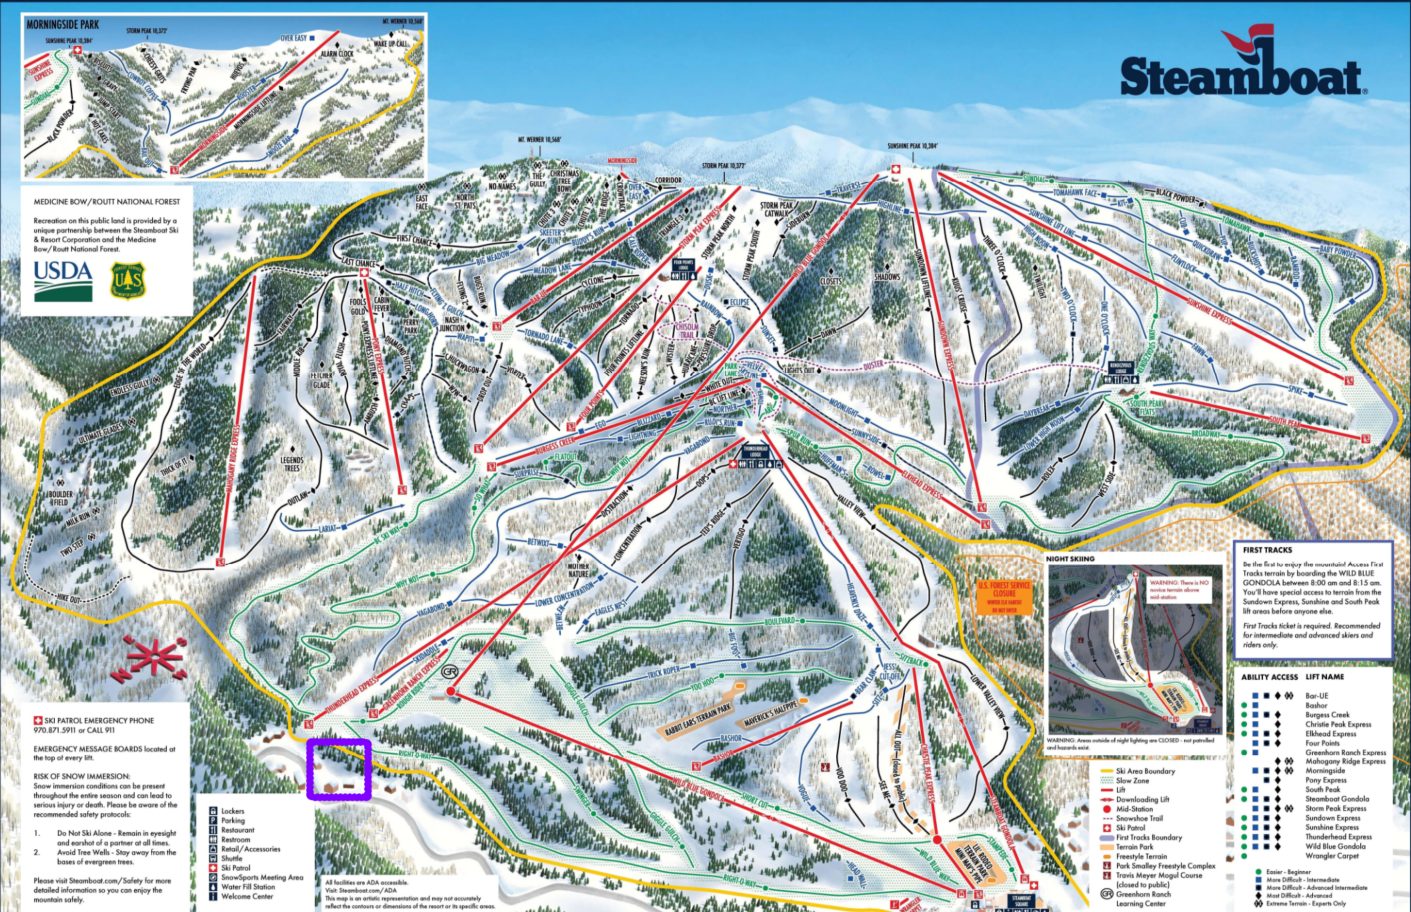 The purple box marks the approximate of the property. Photo Credit: Steamboat Ski Resort